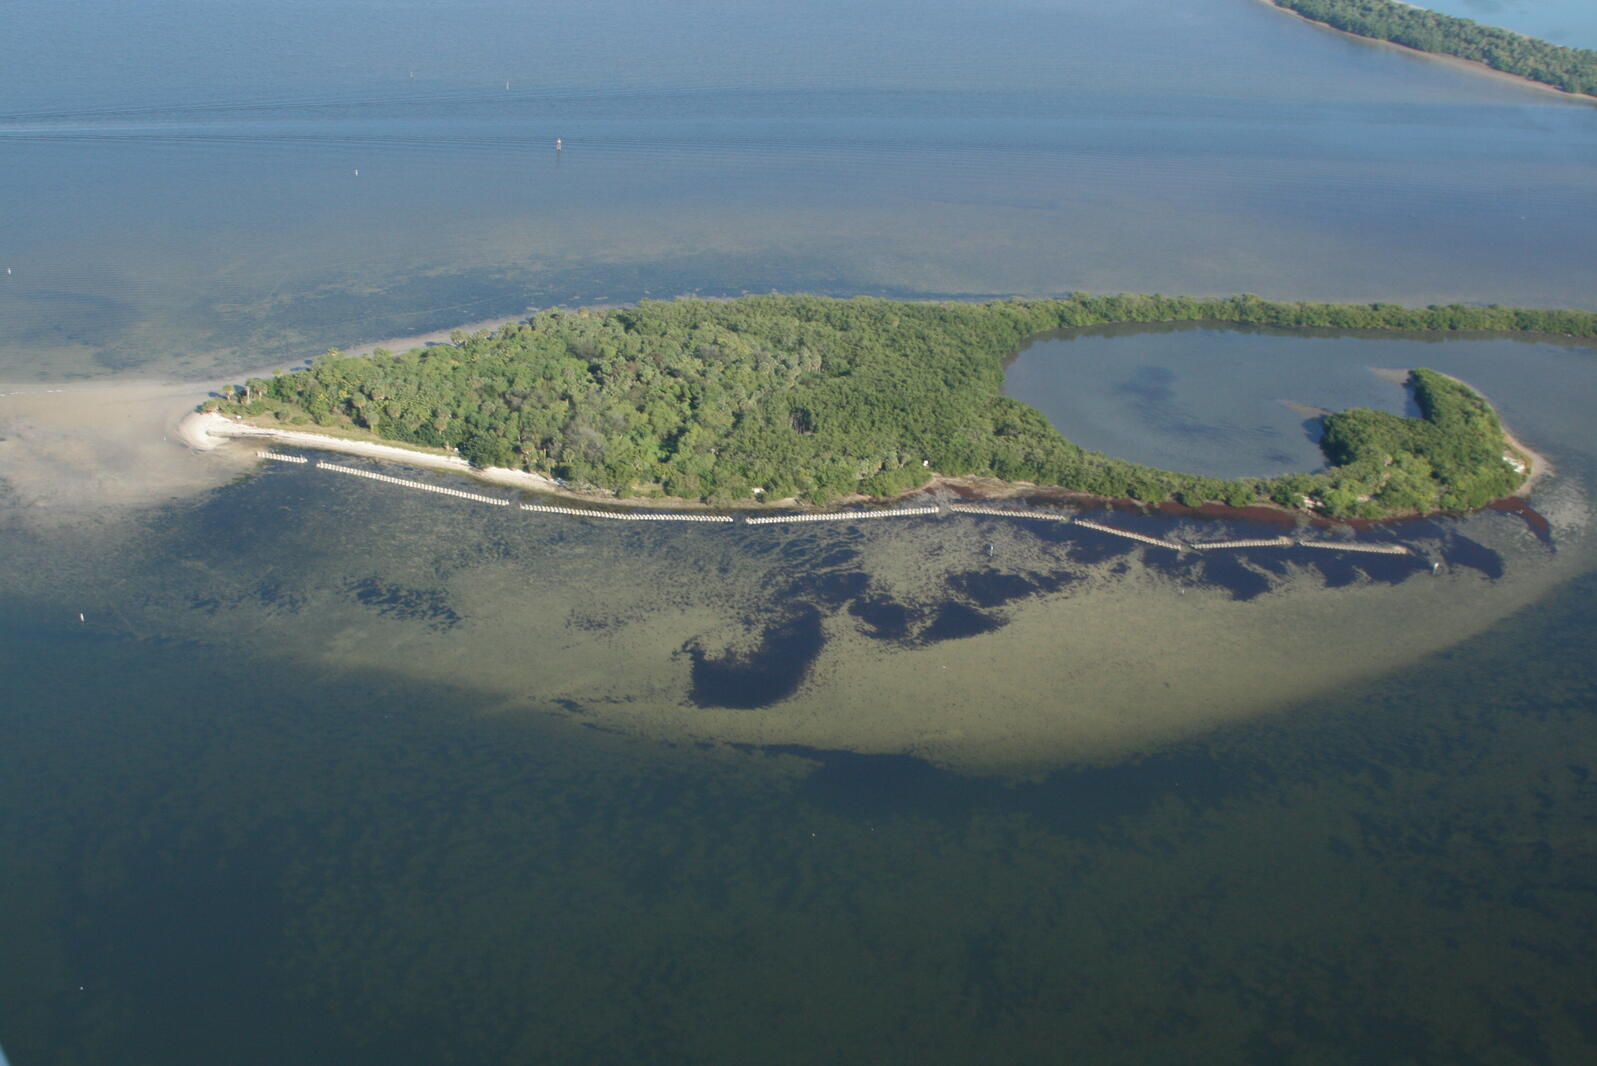 Aerial view of mangrove island surrounded by structure